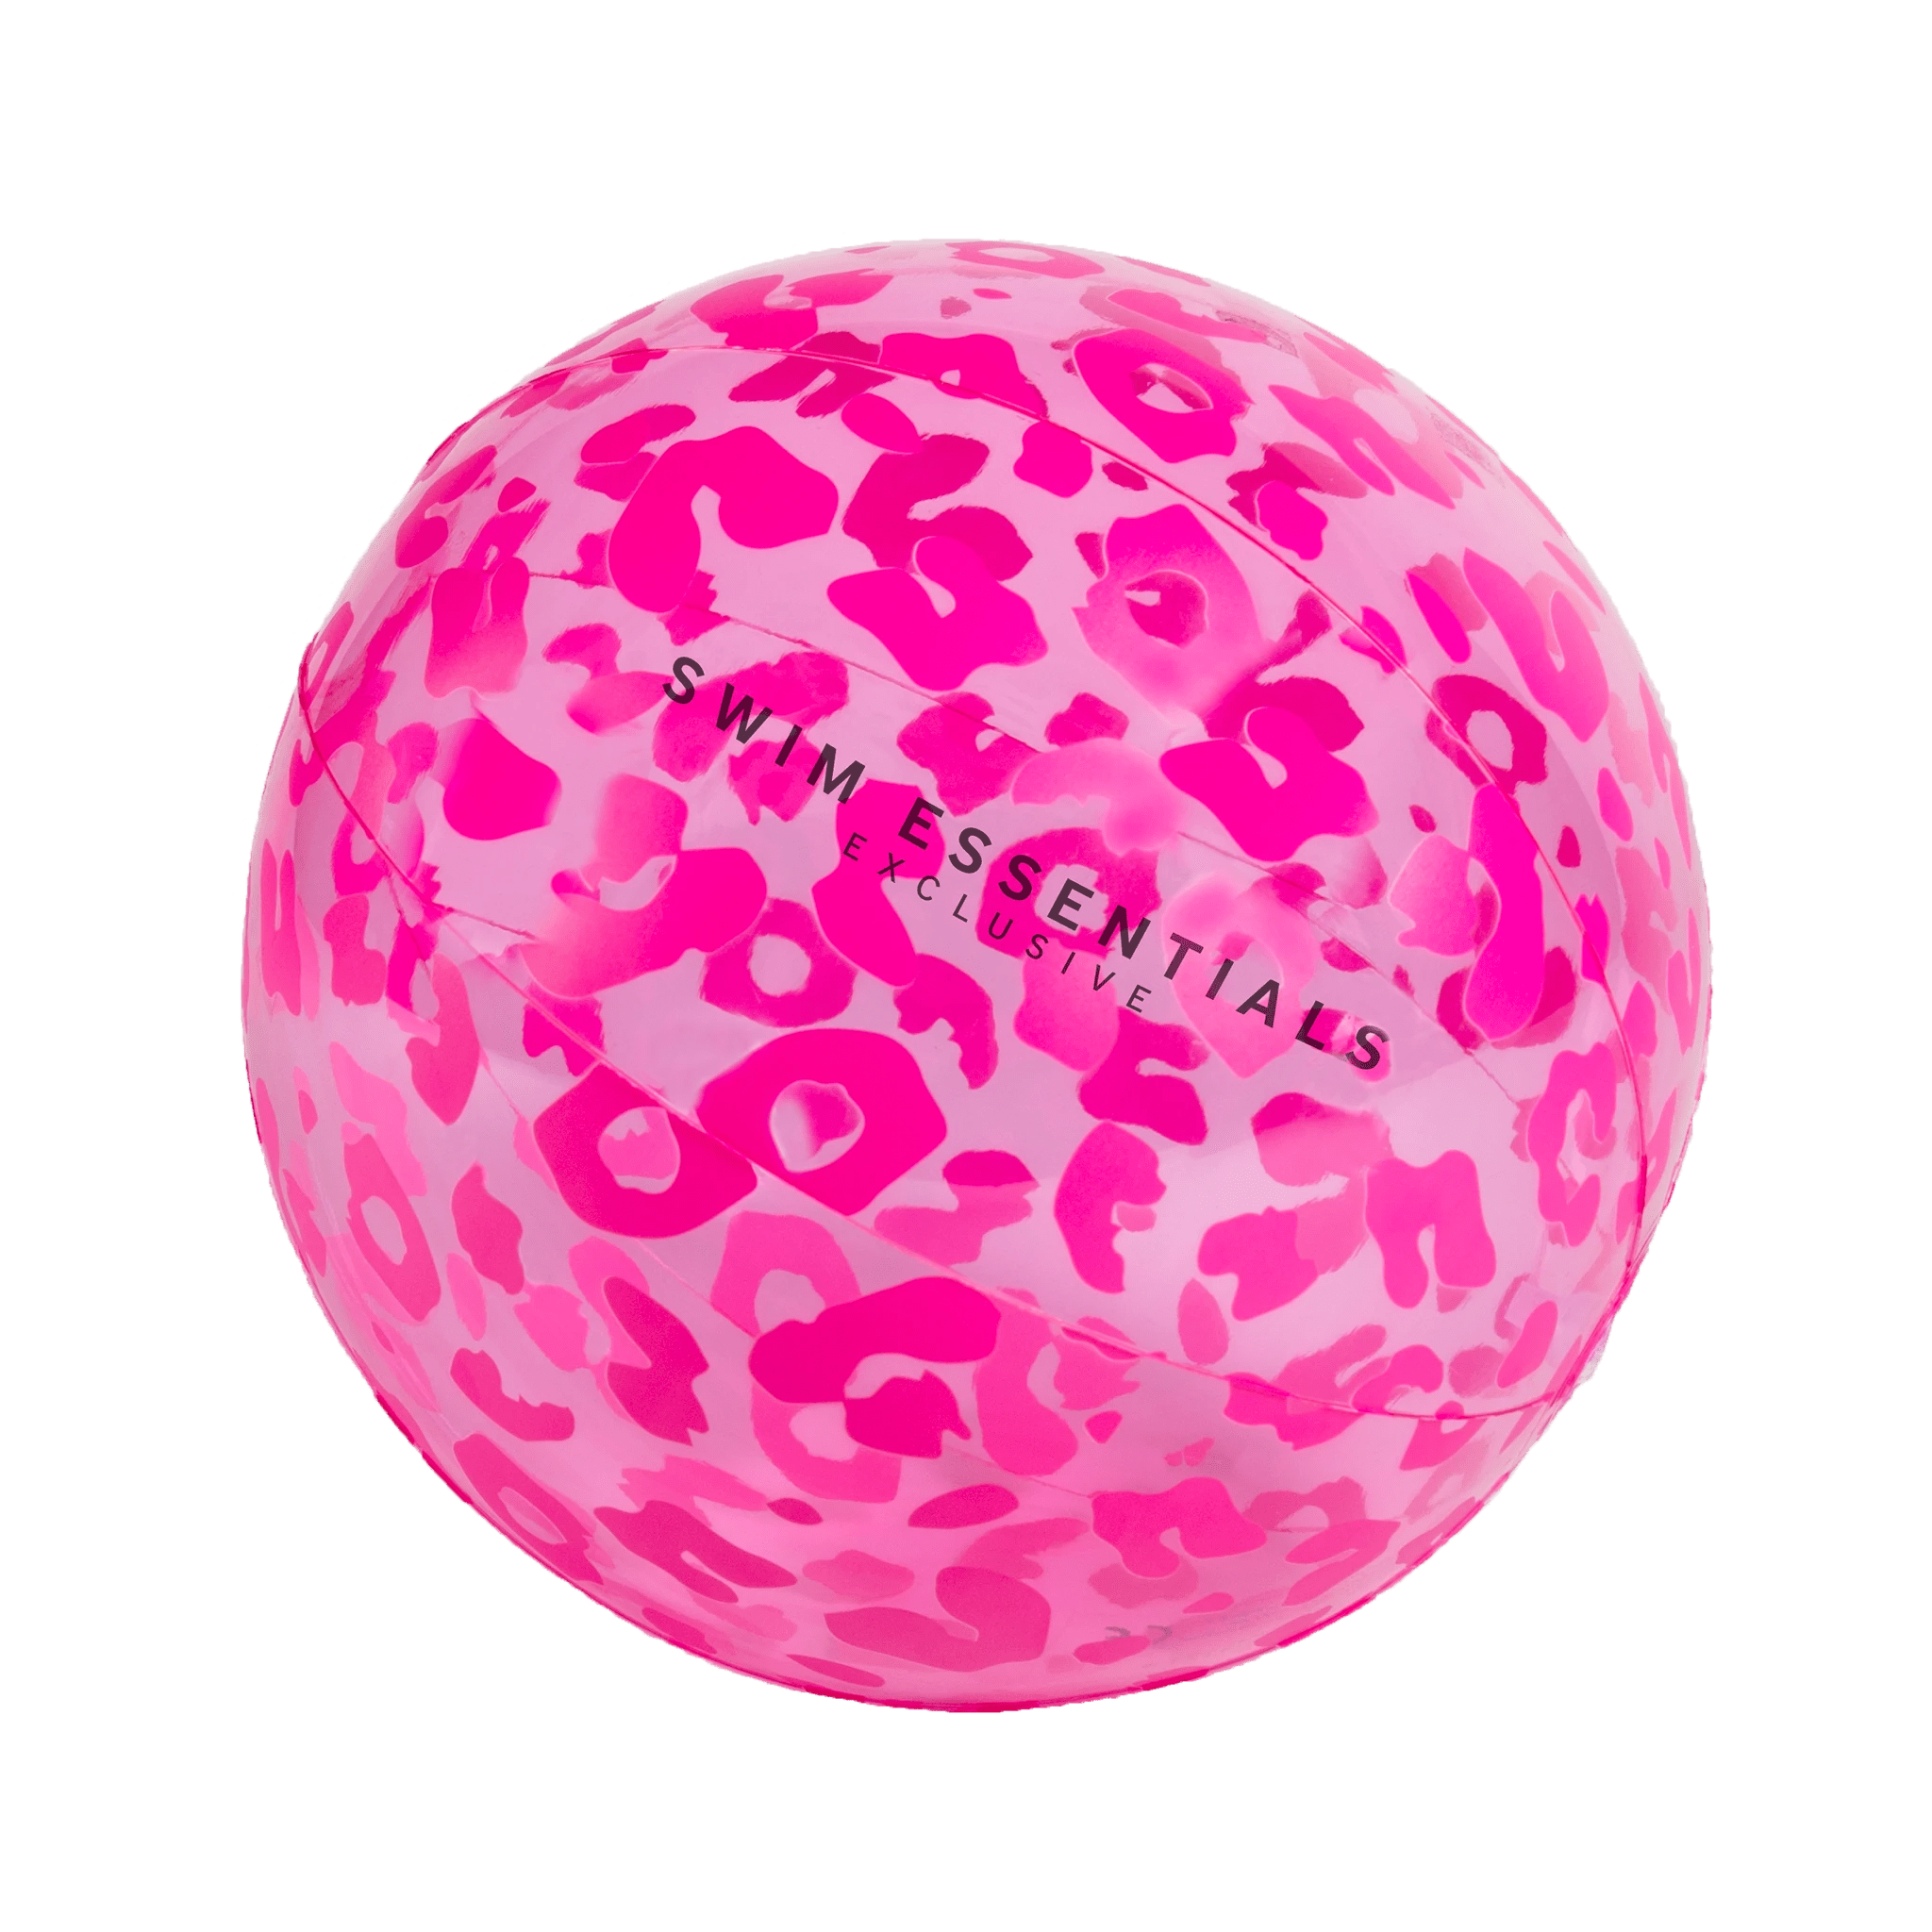 The Essentials Pelota Maxi Inflatable Balls with Neon Panther Print